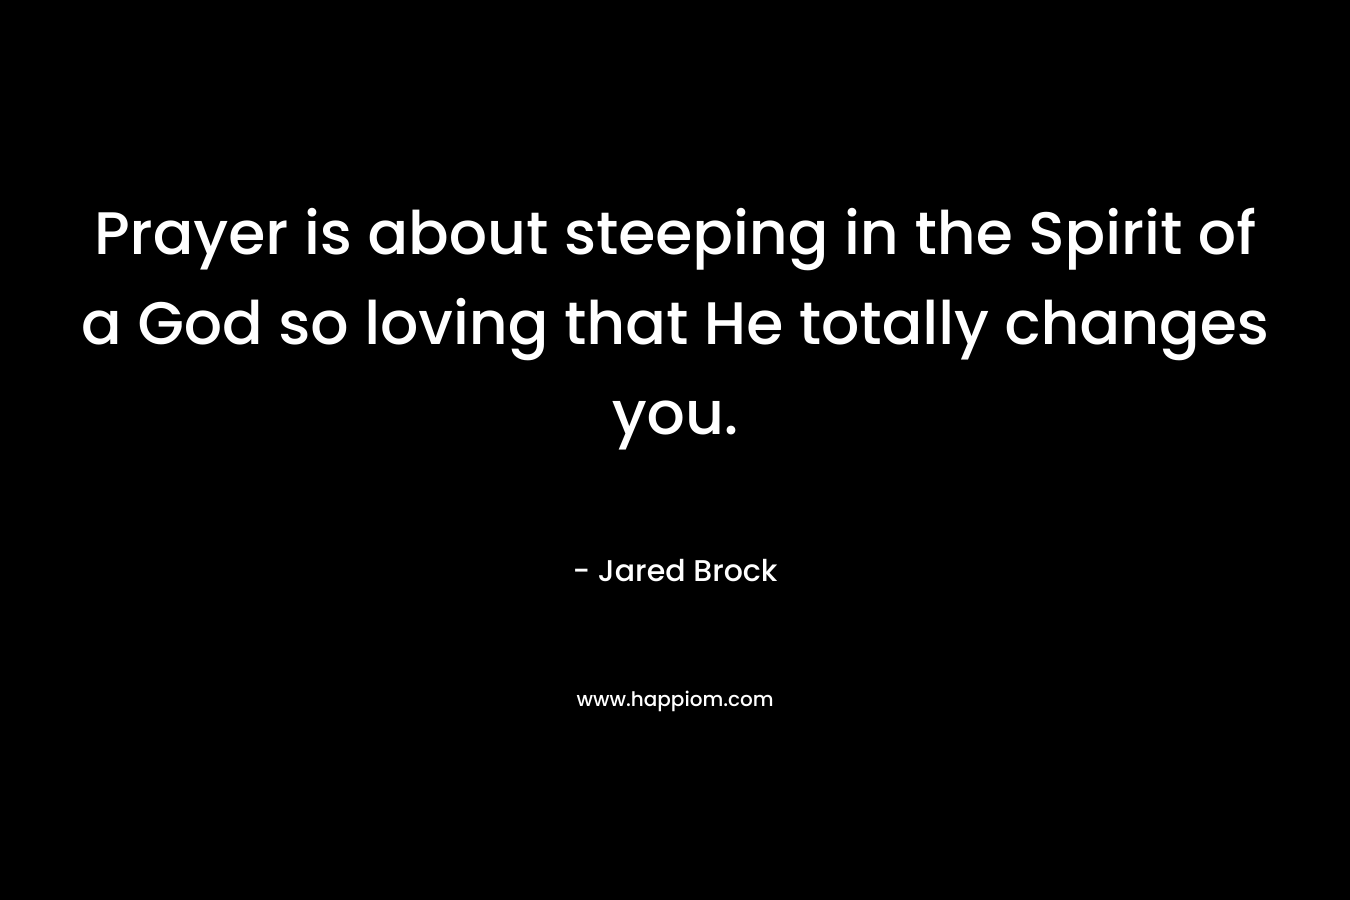 Prayer is about steeping in the Spirit of a God so loving that He totally changes you.